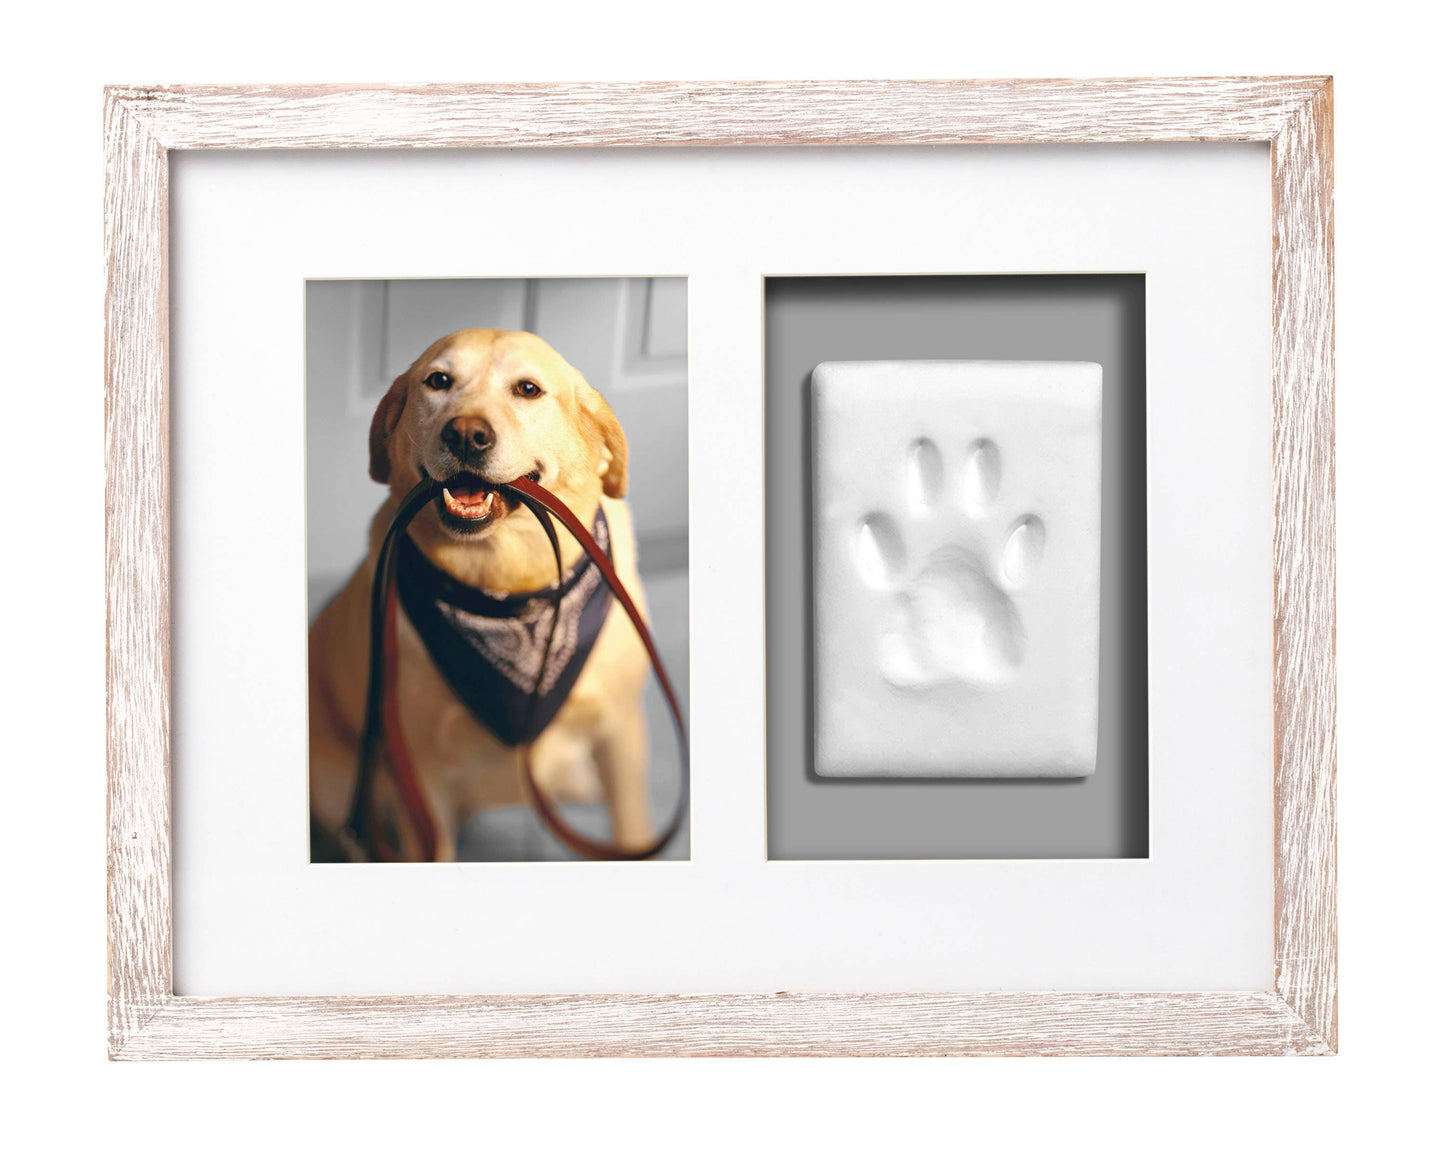 Pawprints Wall Frame and Impression Kit, White Distressed